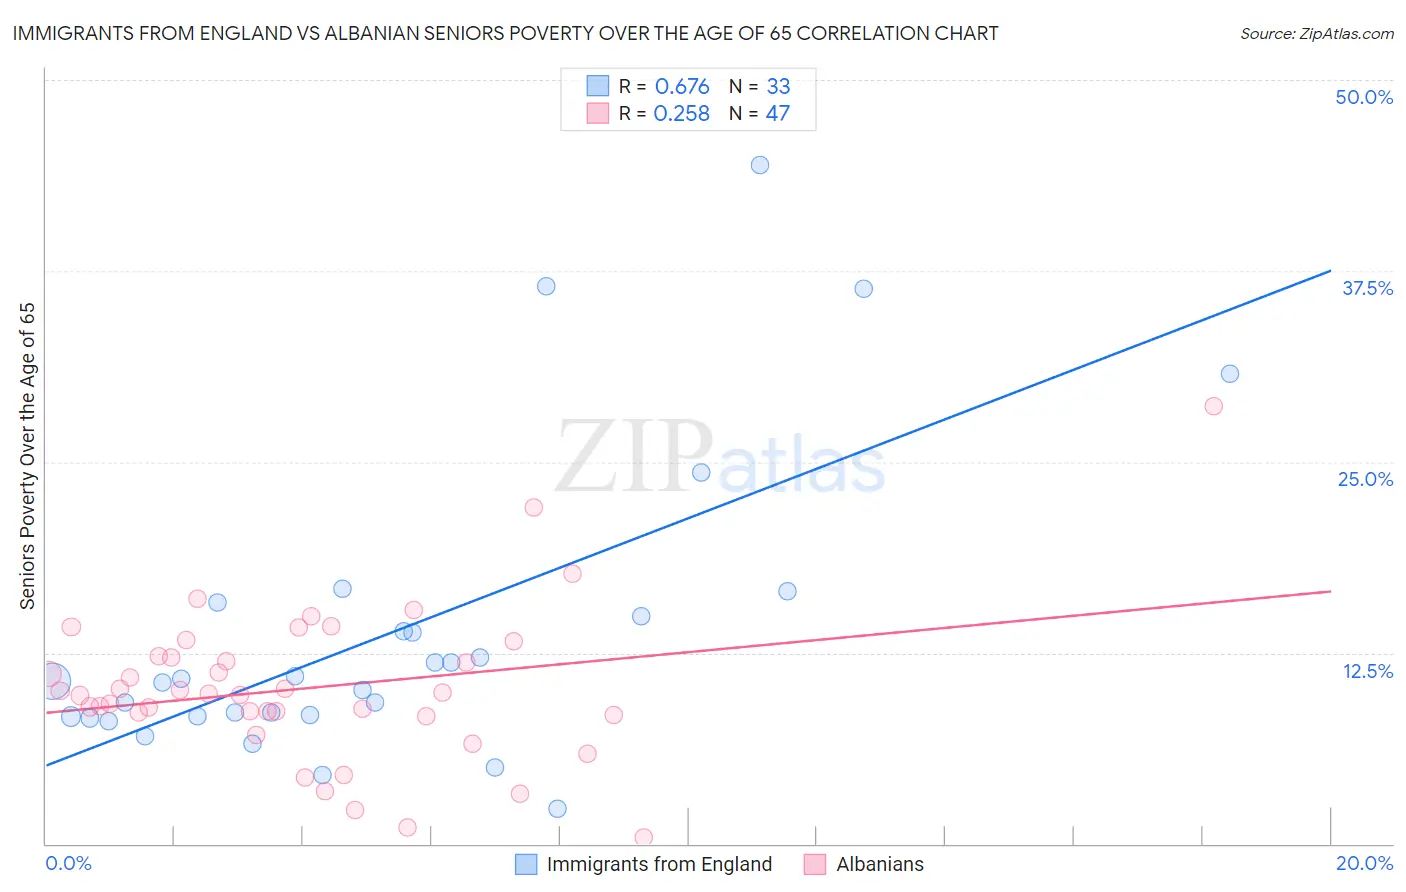 Immigrants from England vs Albanian Seniors Poverty Over the Age of 65